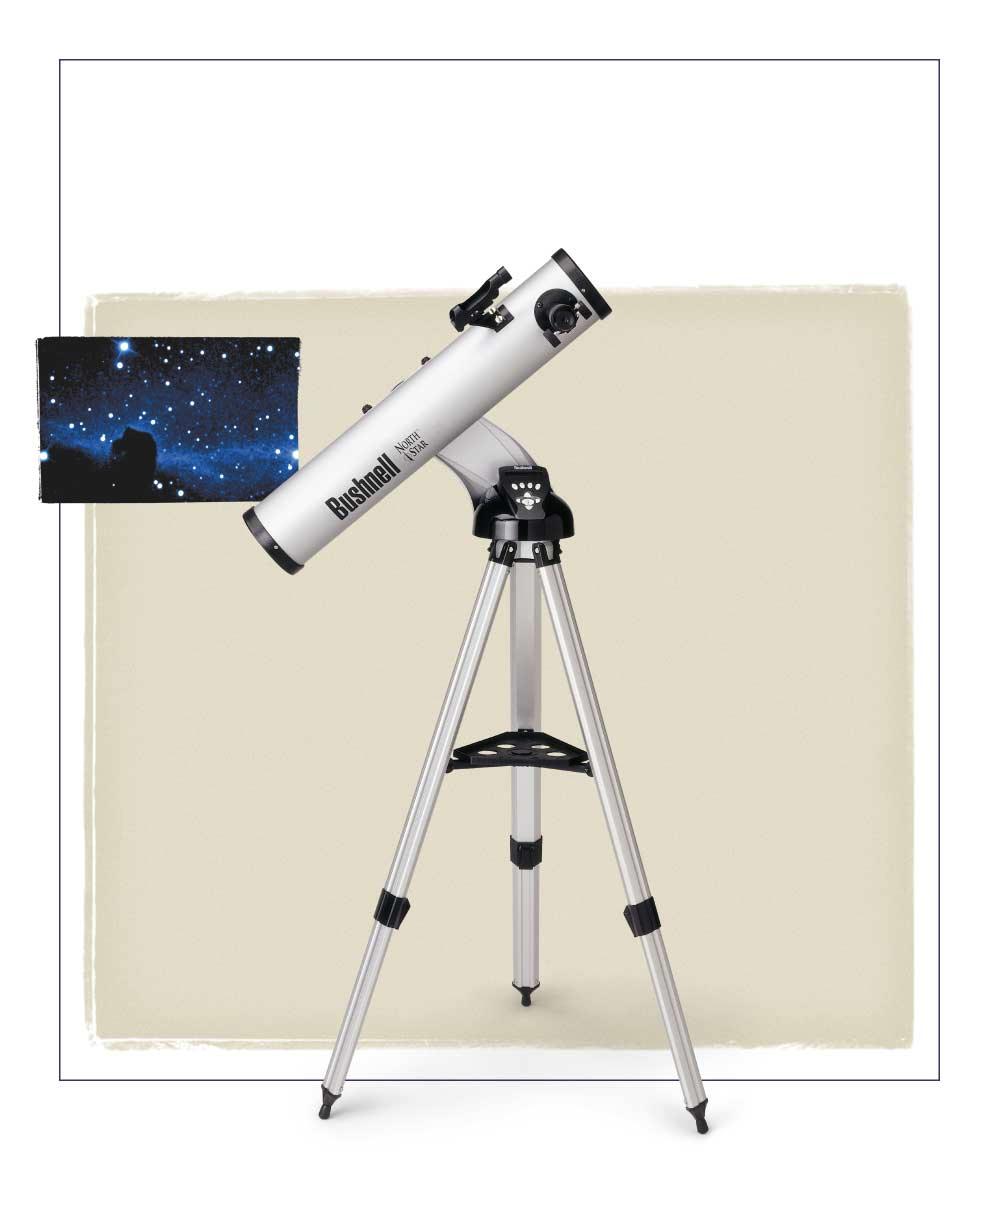 NORTHSTAR GO TO STAR LOCATOR WITH REAL VOICE OUTPUT NORTHSTAR GO TO STAR LOCATOR TELESCOPES 525 x 3" Real Voice Output With the touch of a button this talking telescope describes the wonders of the